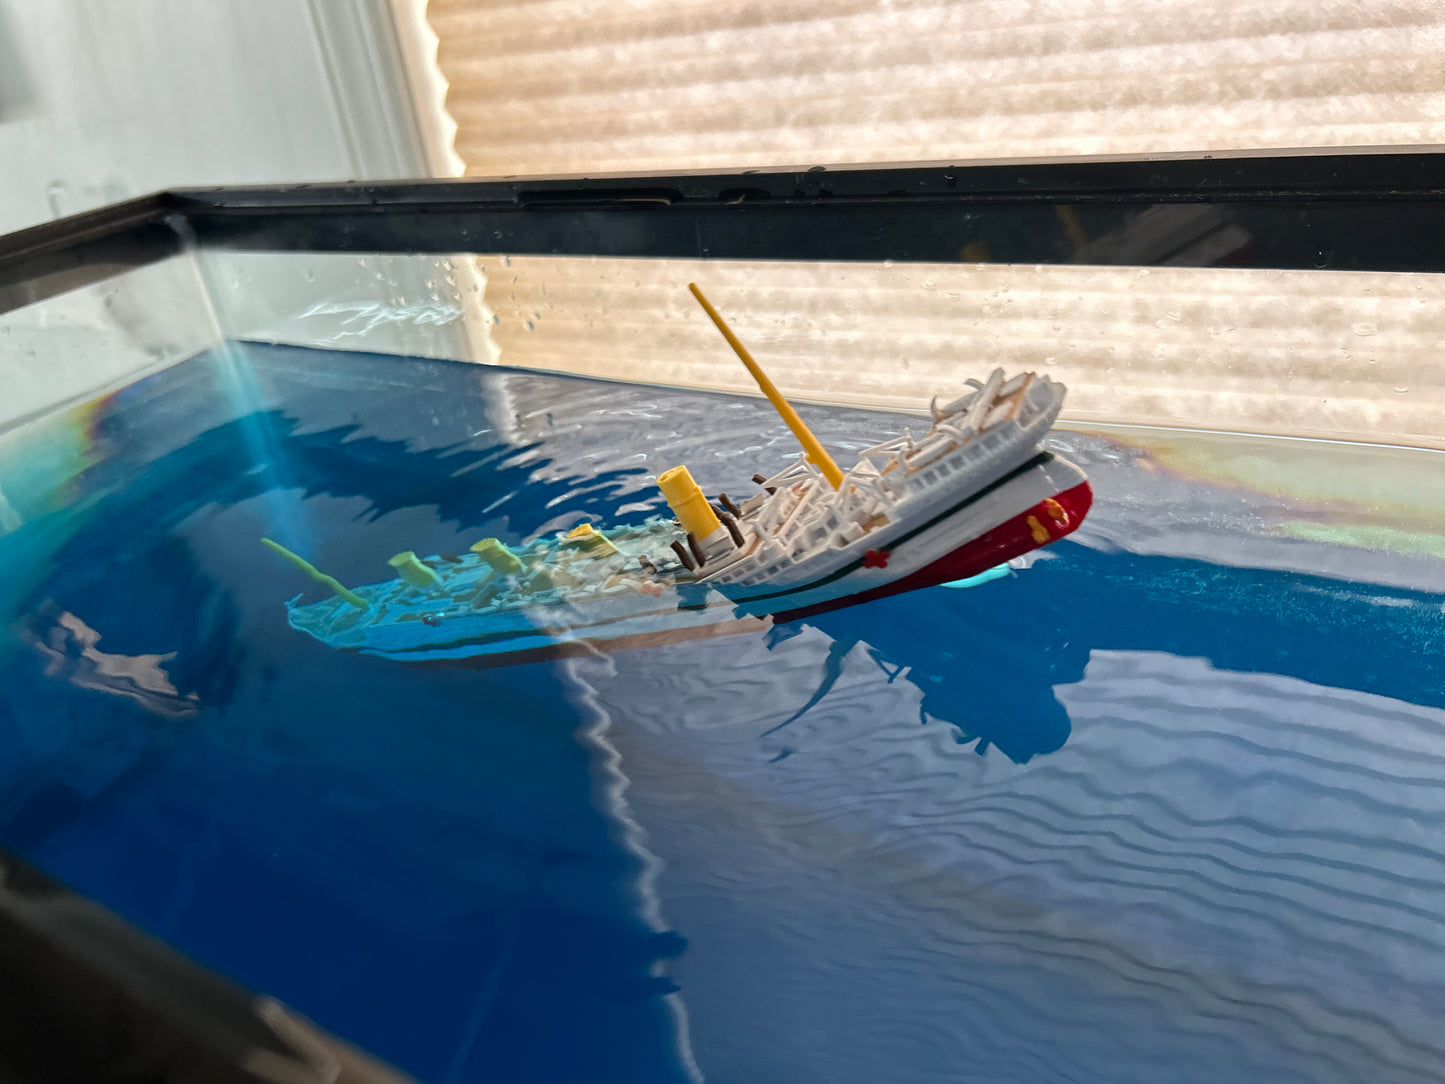 HMHS Britannic Submersible Model, Educational Model, FLOATS & SINKS Historically accurate